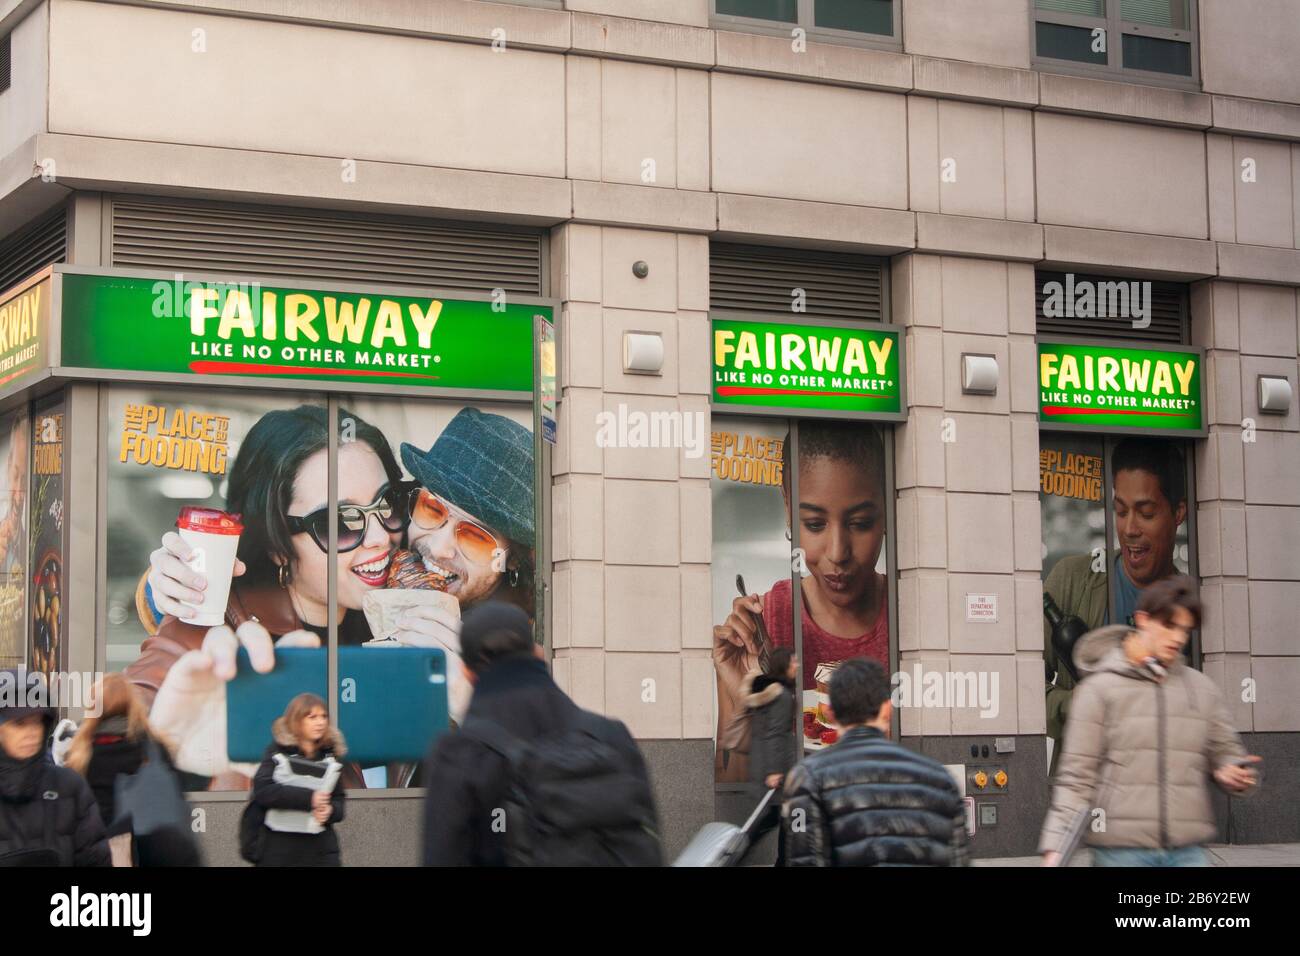 outside of fairway market in the chelsea area of manhattan. Fairway is a regional grocer that recently filed for bankruptcy Stock Photo